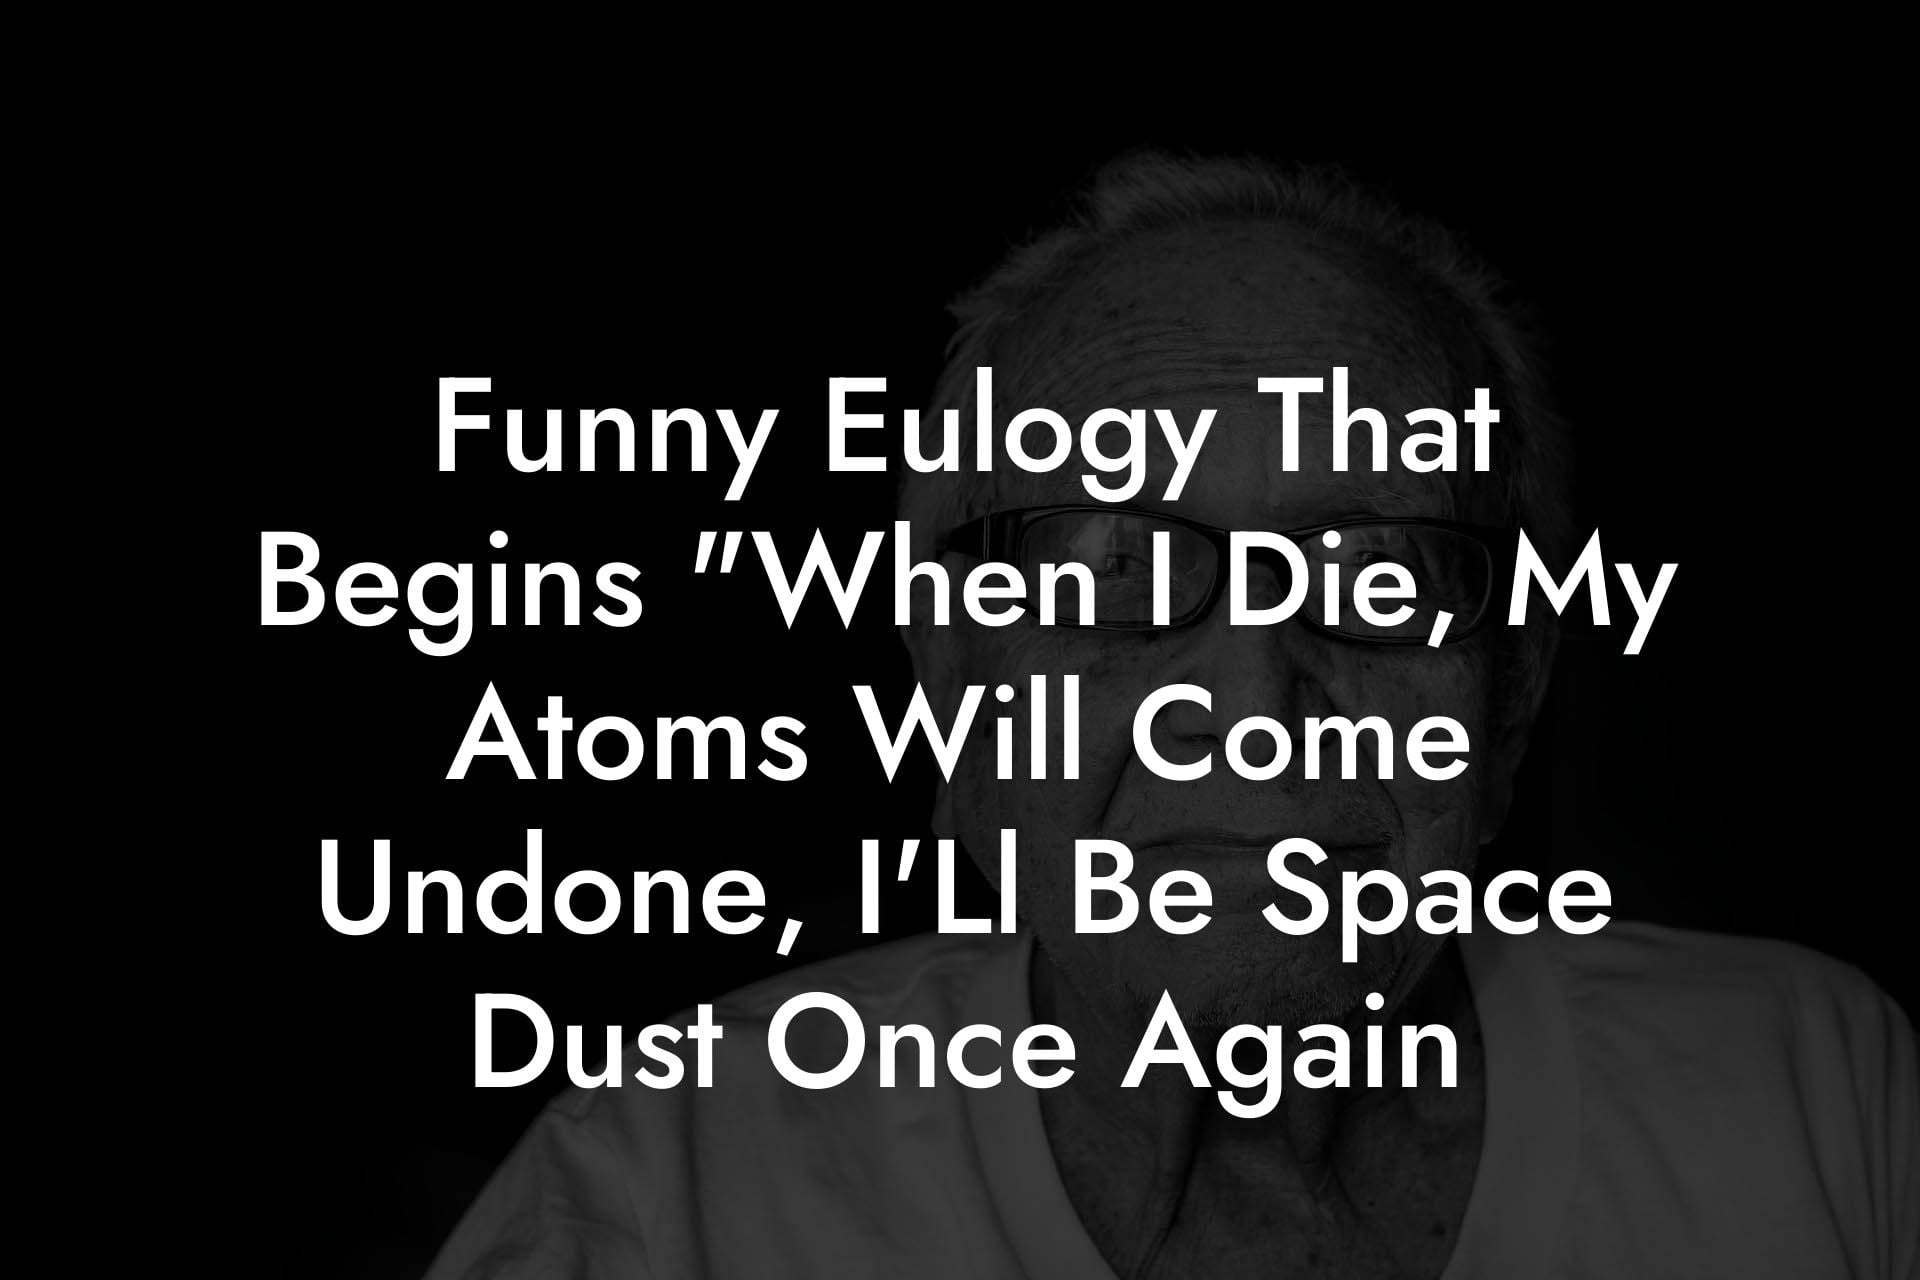 Funny Eulogy That Begins "When I Die, My Atoms Will Come Undone, I'Ll Be Space Dust Once Again